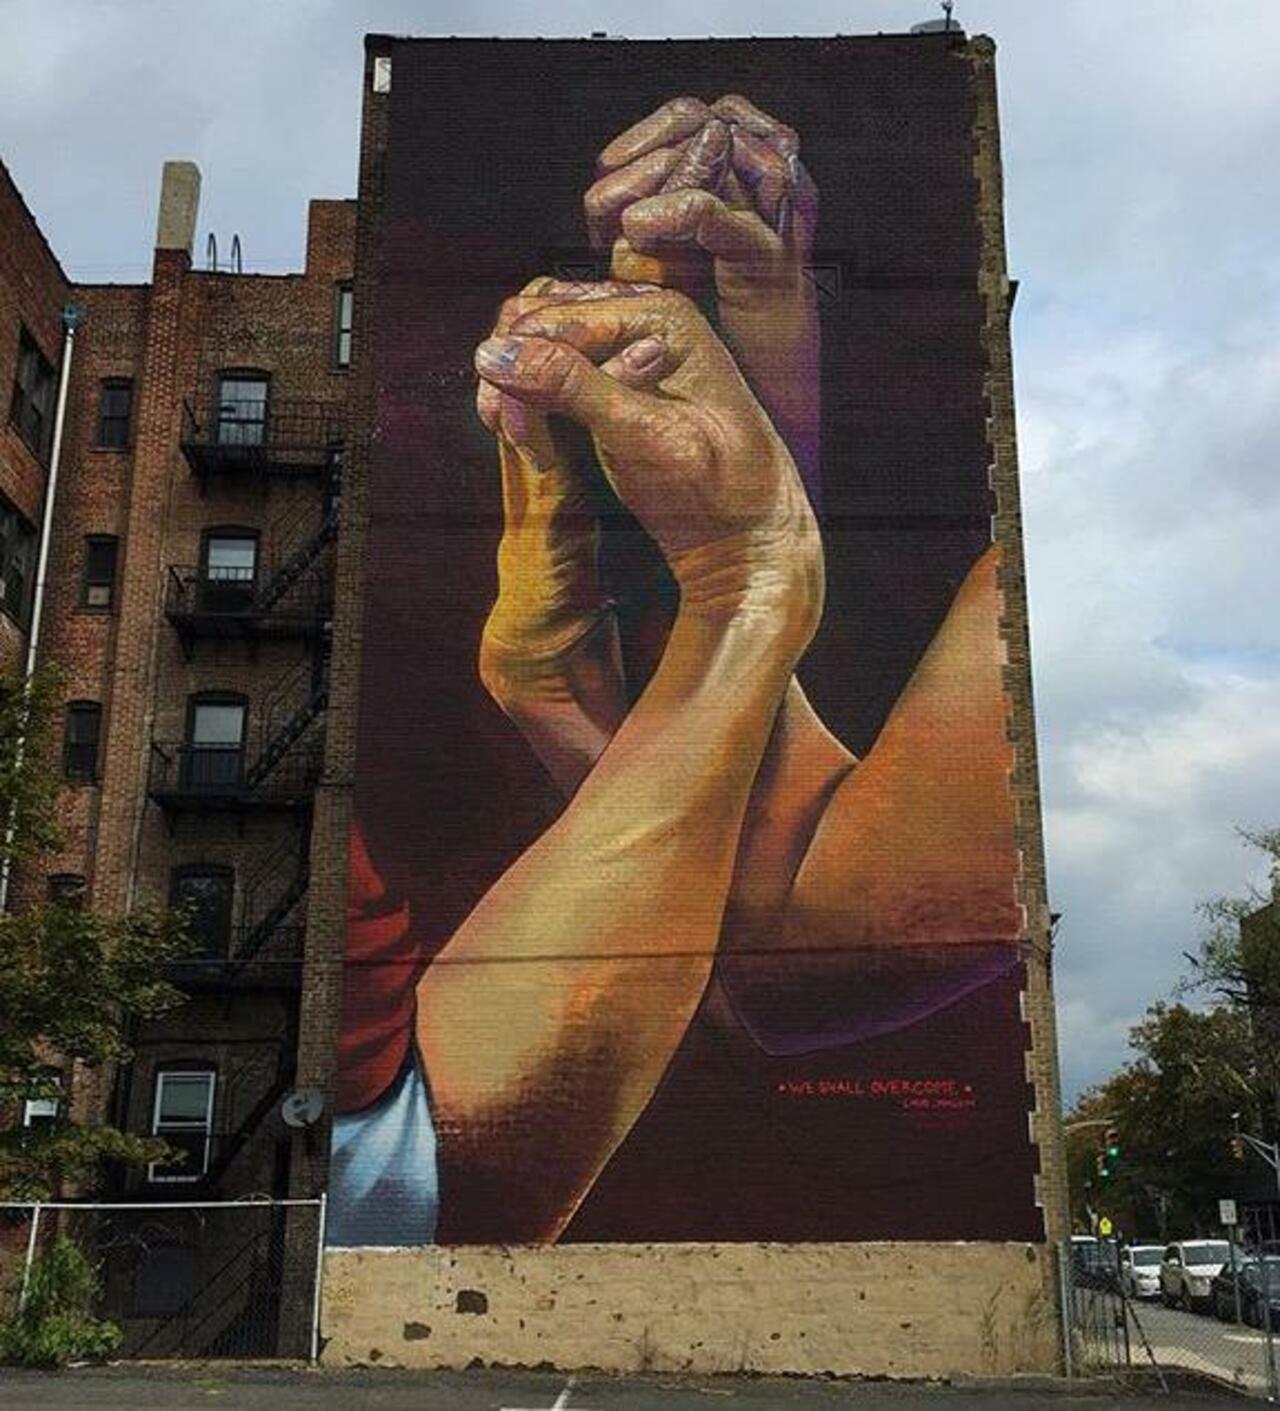 New Street Art by CaseMaclaim in Jersey City for the TheBKcollective 

#art #graffiti #mural #streetart http://t.co/qqJvDvnx0t